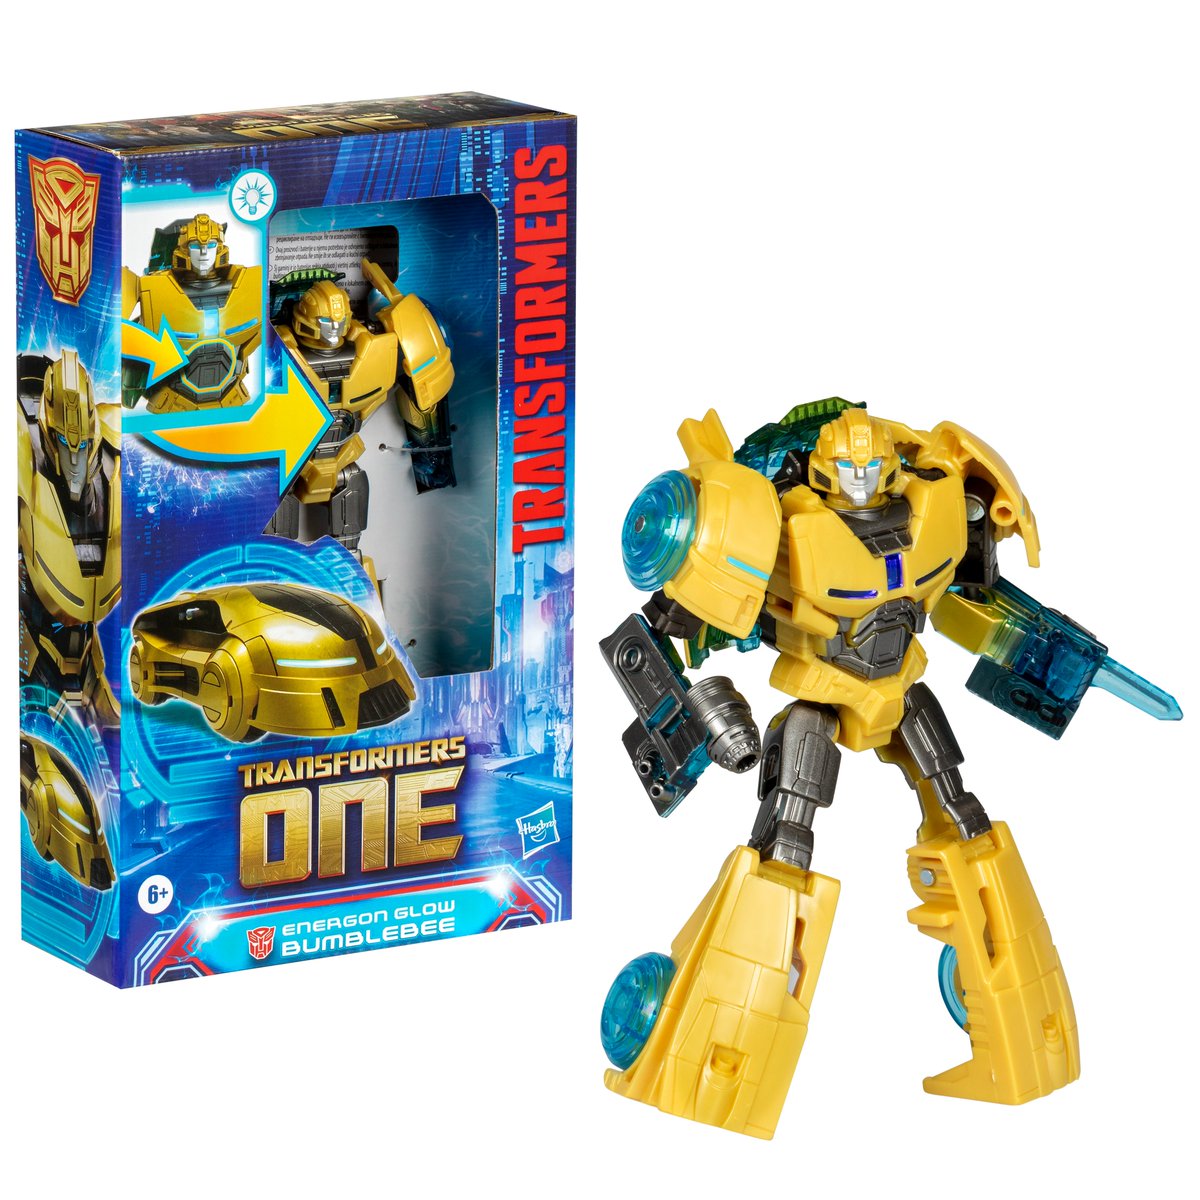 TF: ONE 'Energon Glow Bumblebee'

Yea, these gimmick toys are a MASSIVE Step up from ROTB.

Hoping these do better than the ROTB ones